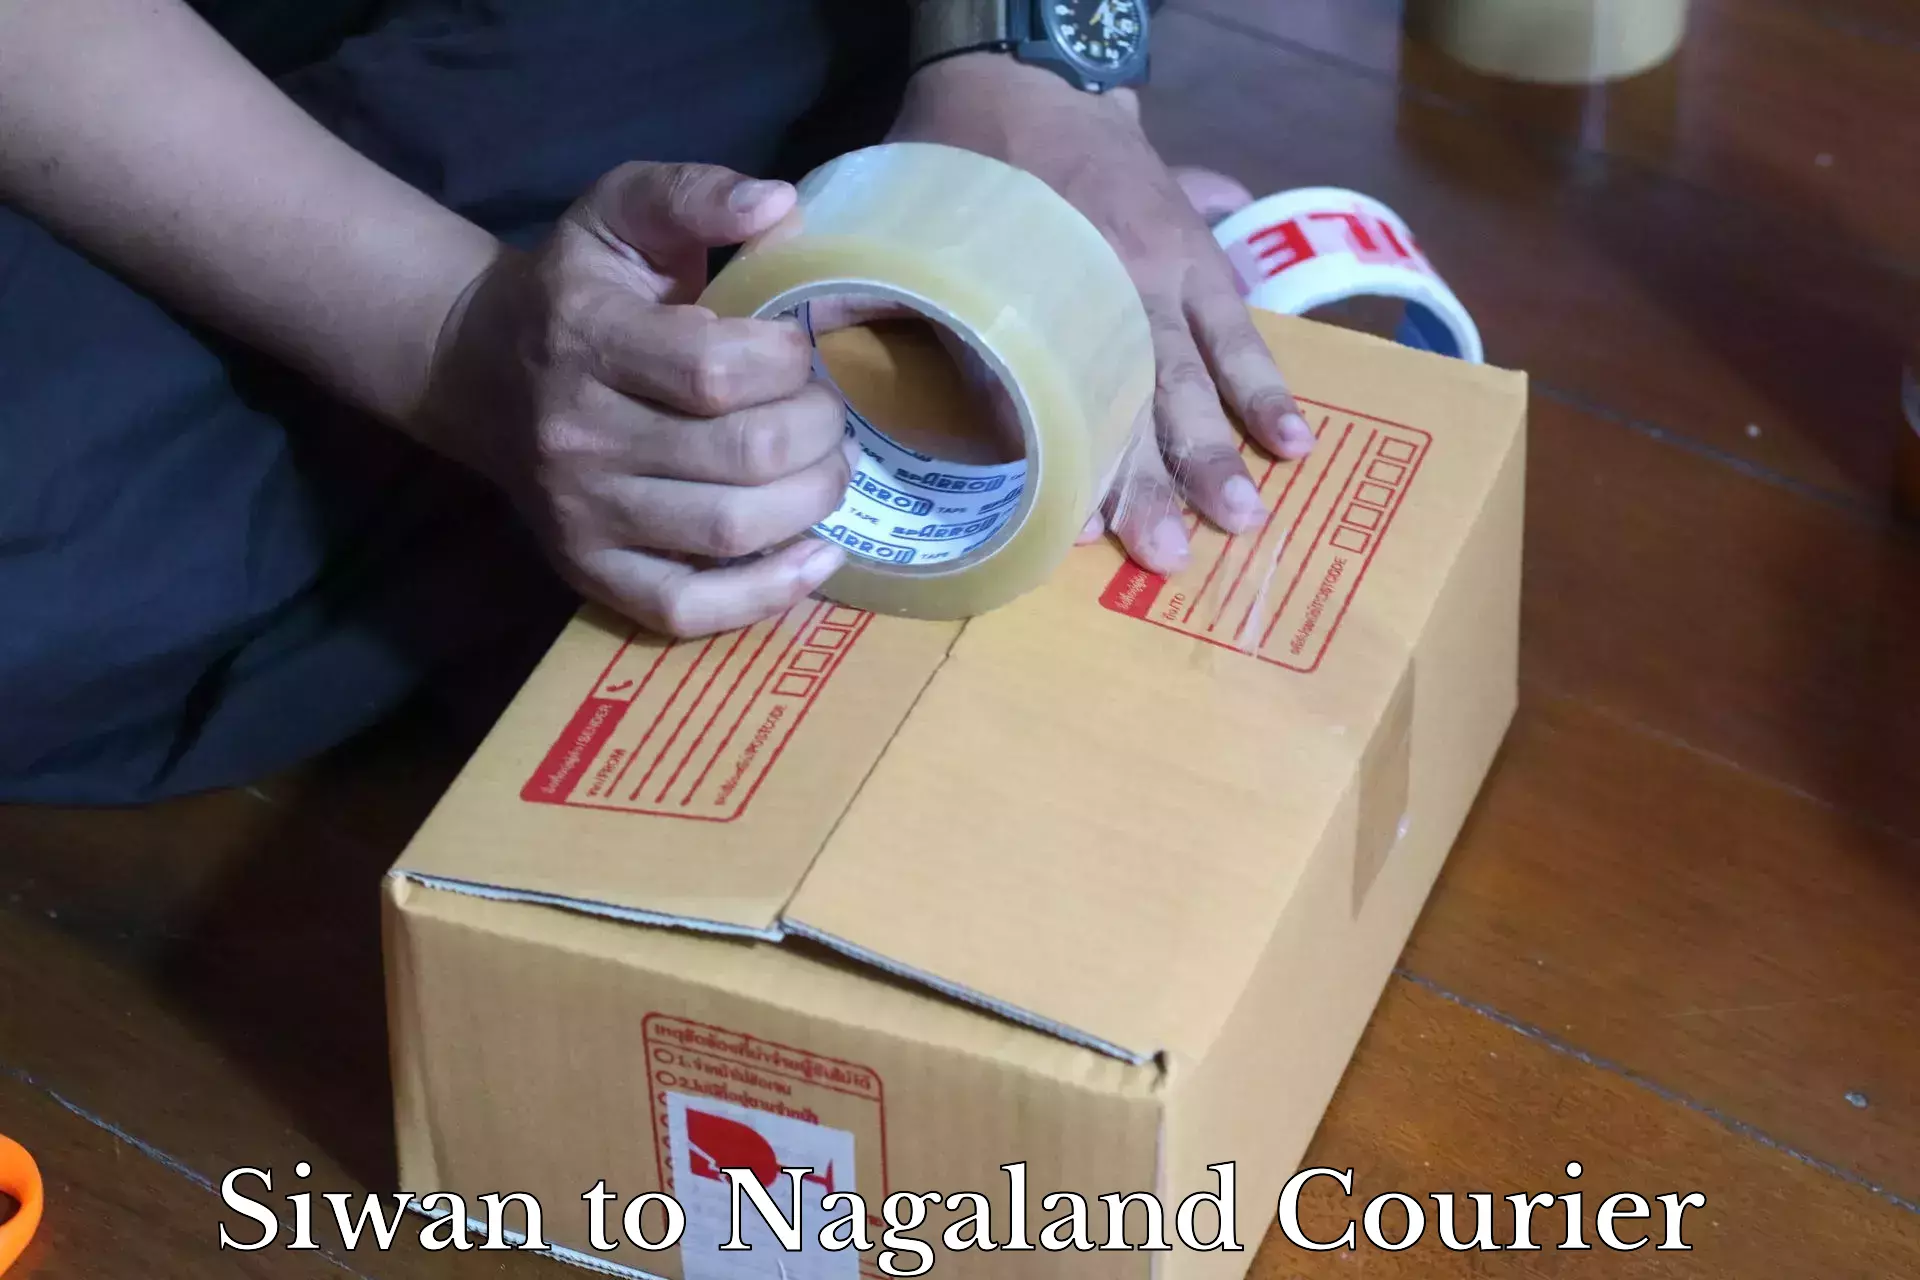 Reliable logistics providers Siwan to Nagaland